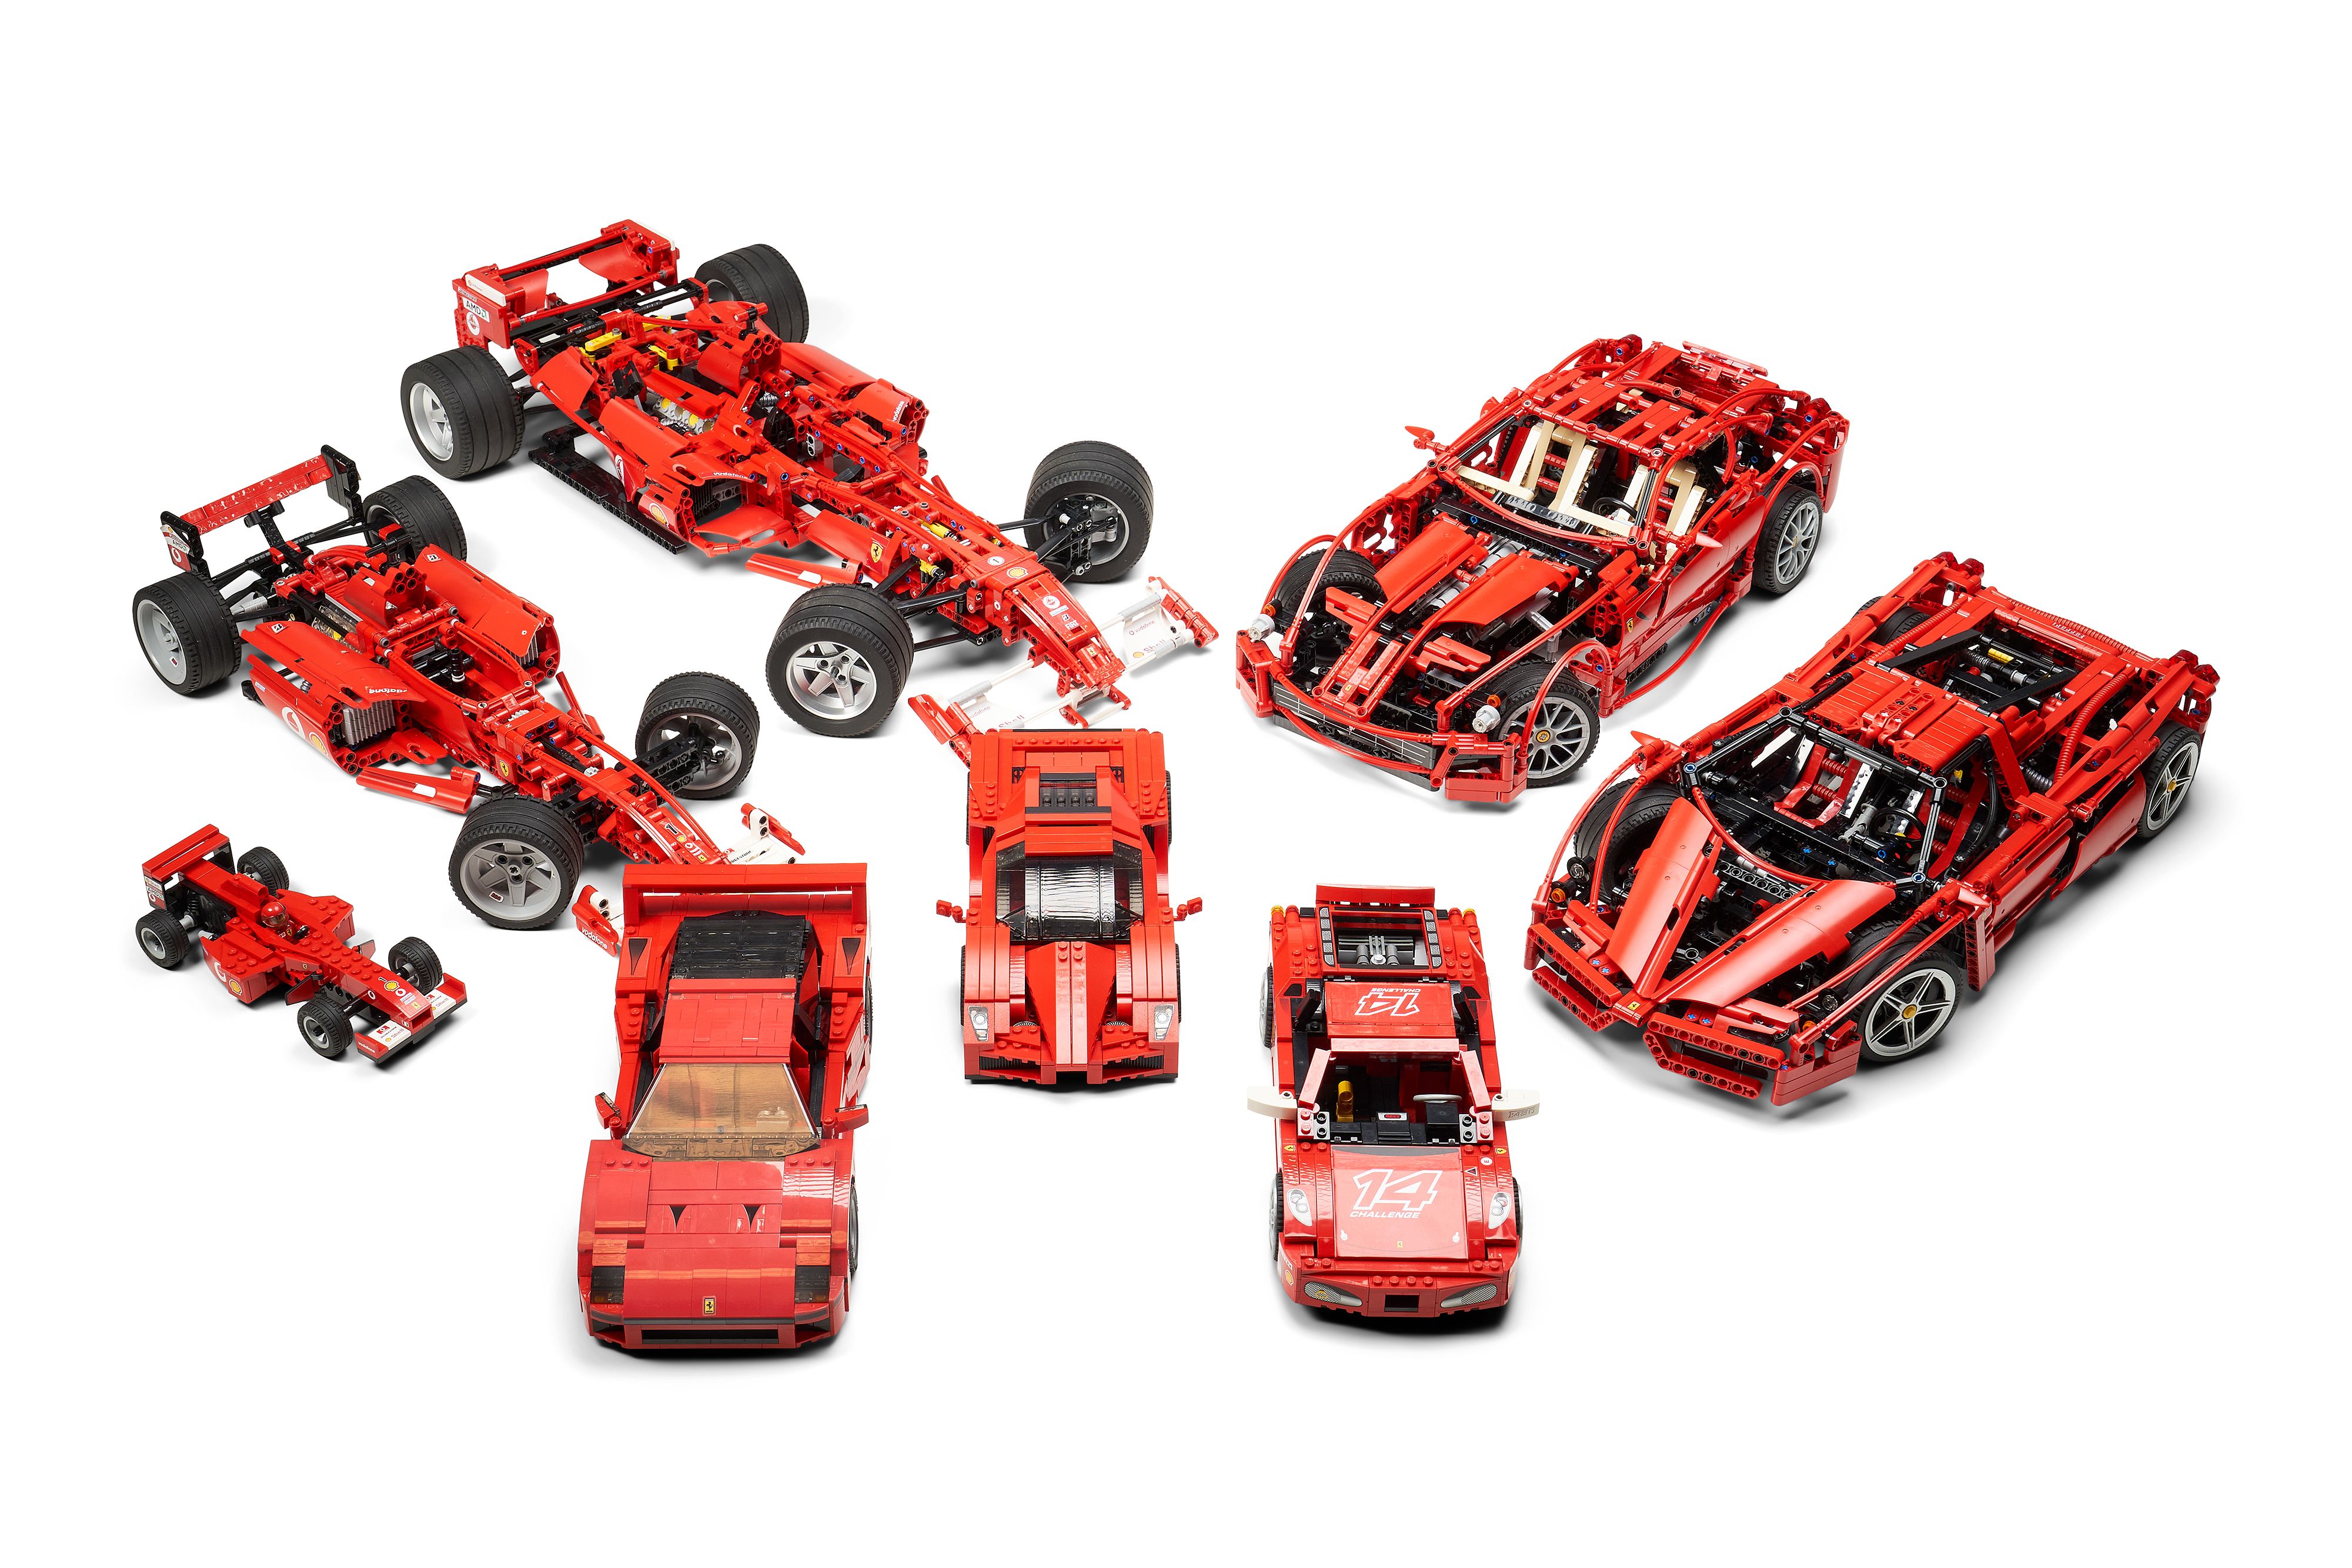 boog maagd atmosfeer Your Guide to Every Ferrari Lego Kit Ever Made